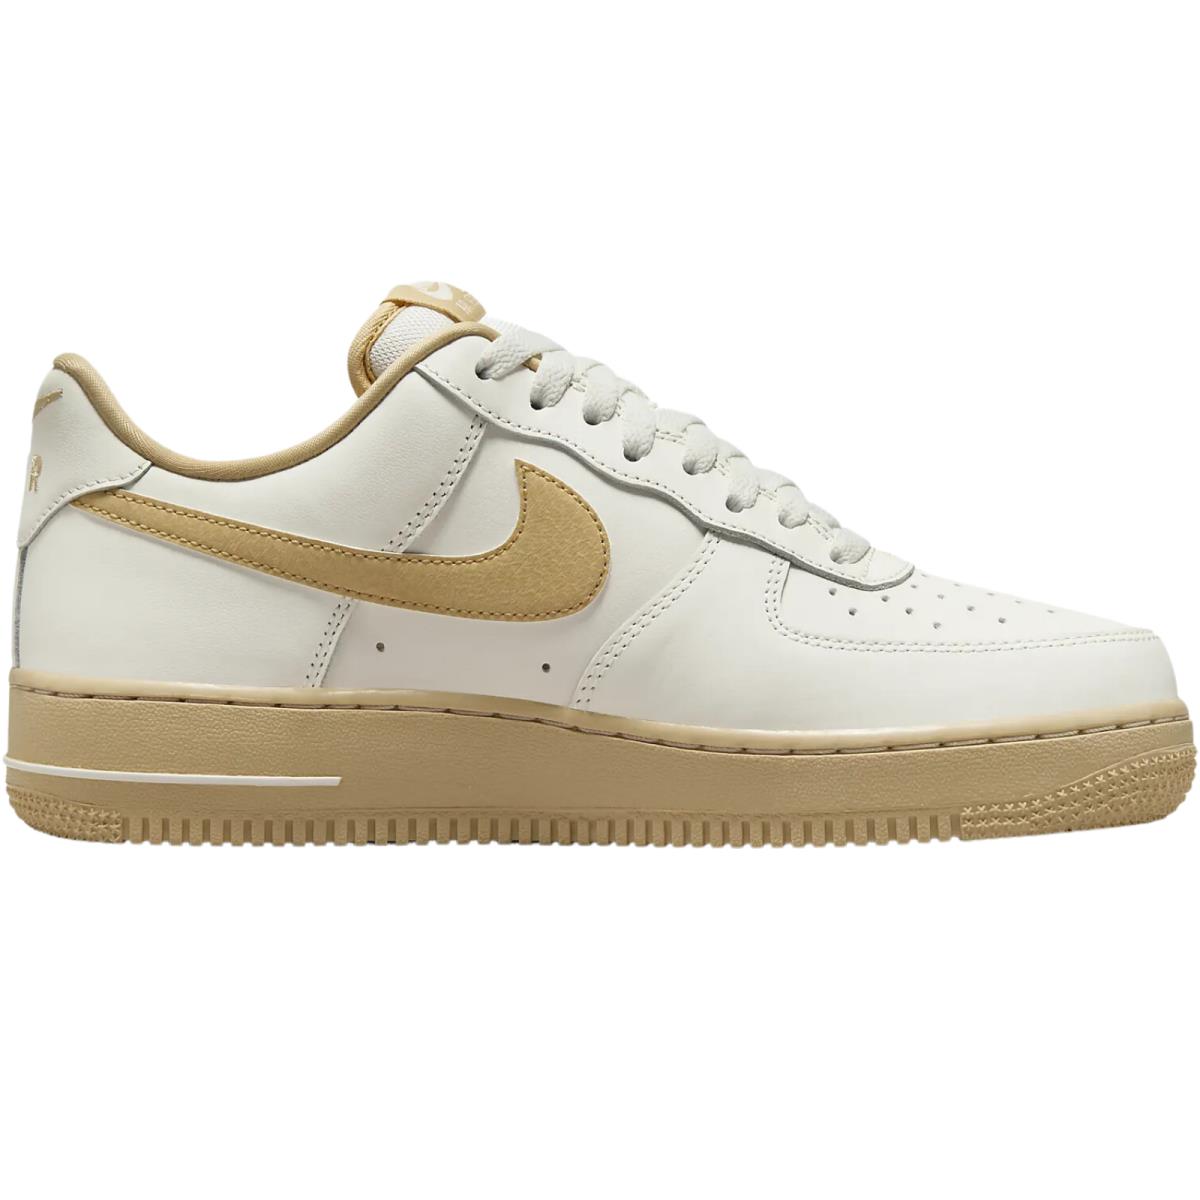 Nike Air Force 1 Women`s Casual Shoes All Colors US Sizes 6-11 Sail/Vintage Green/Sesame